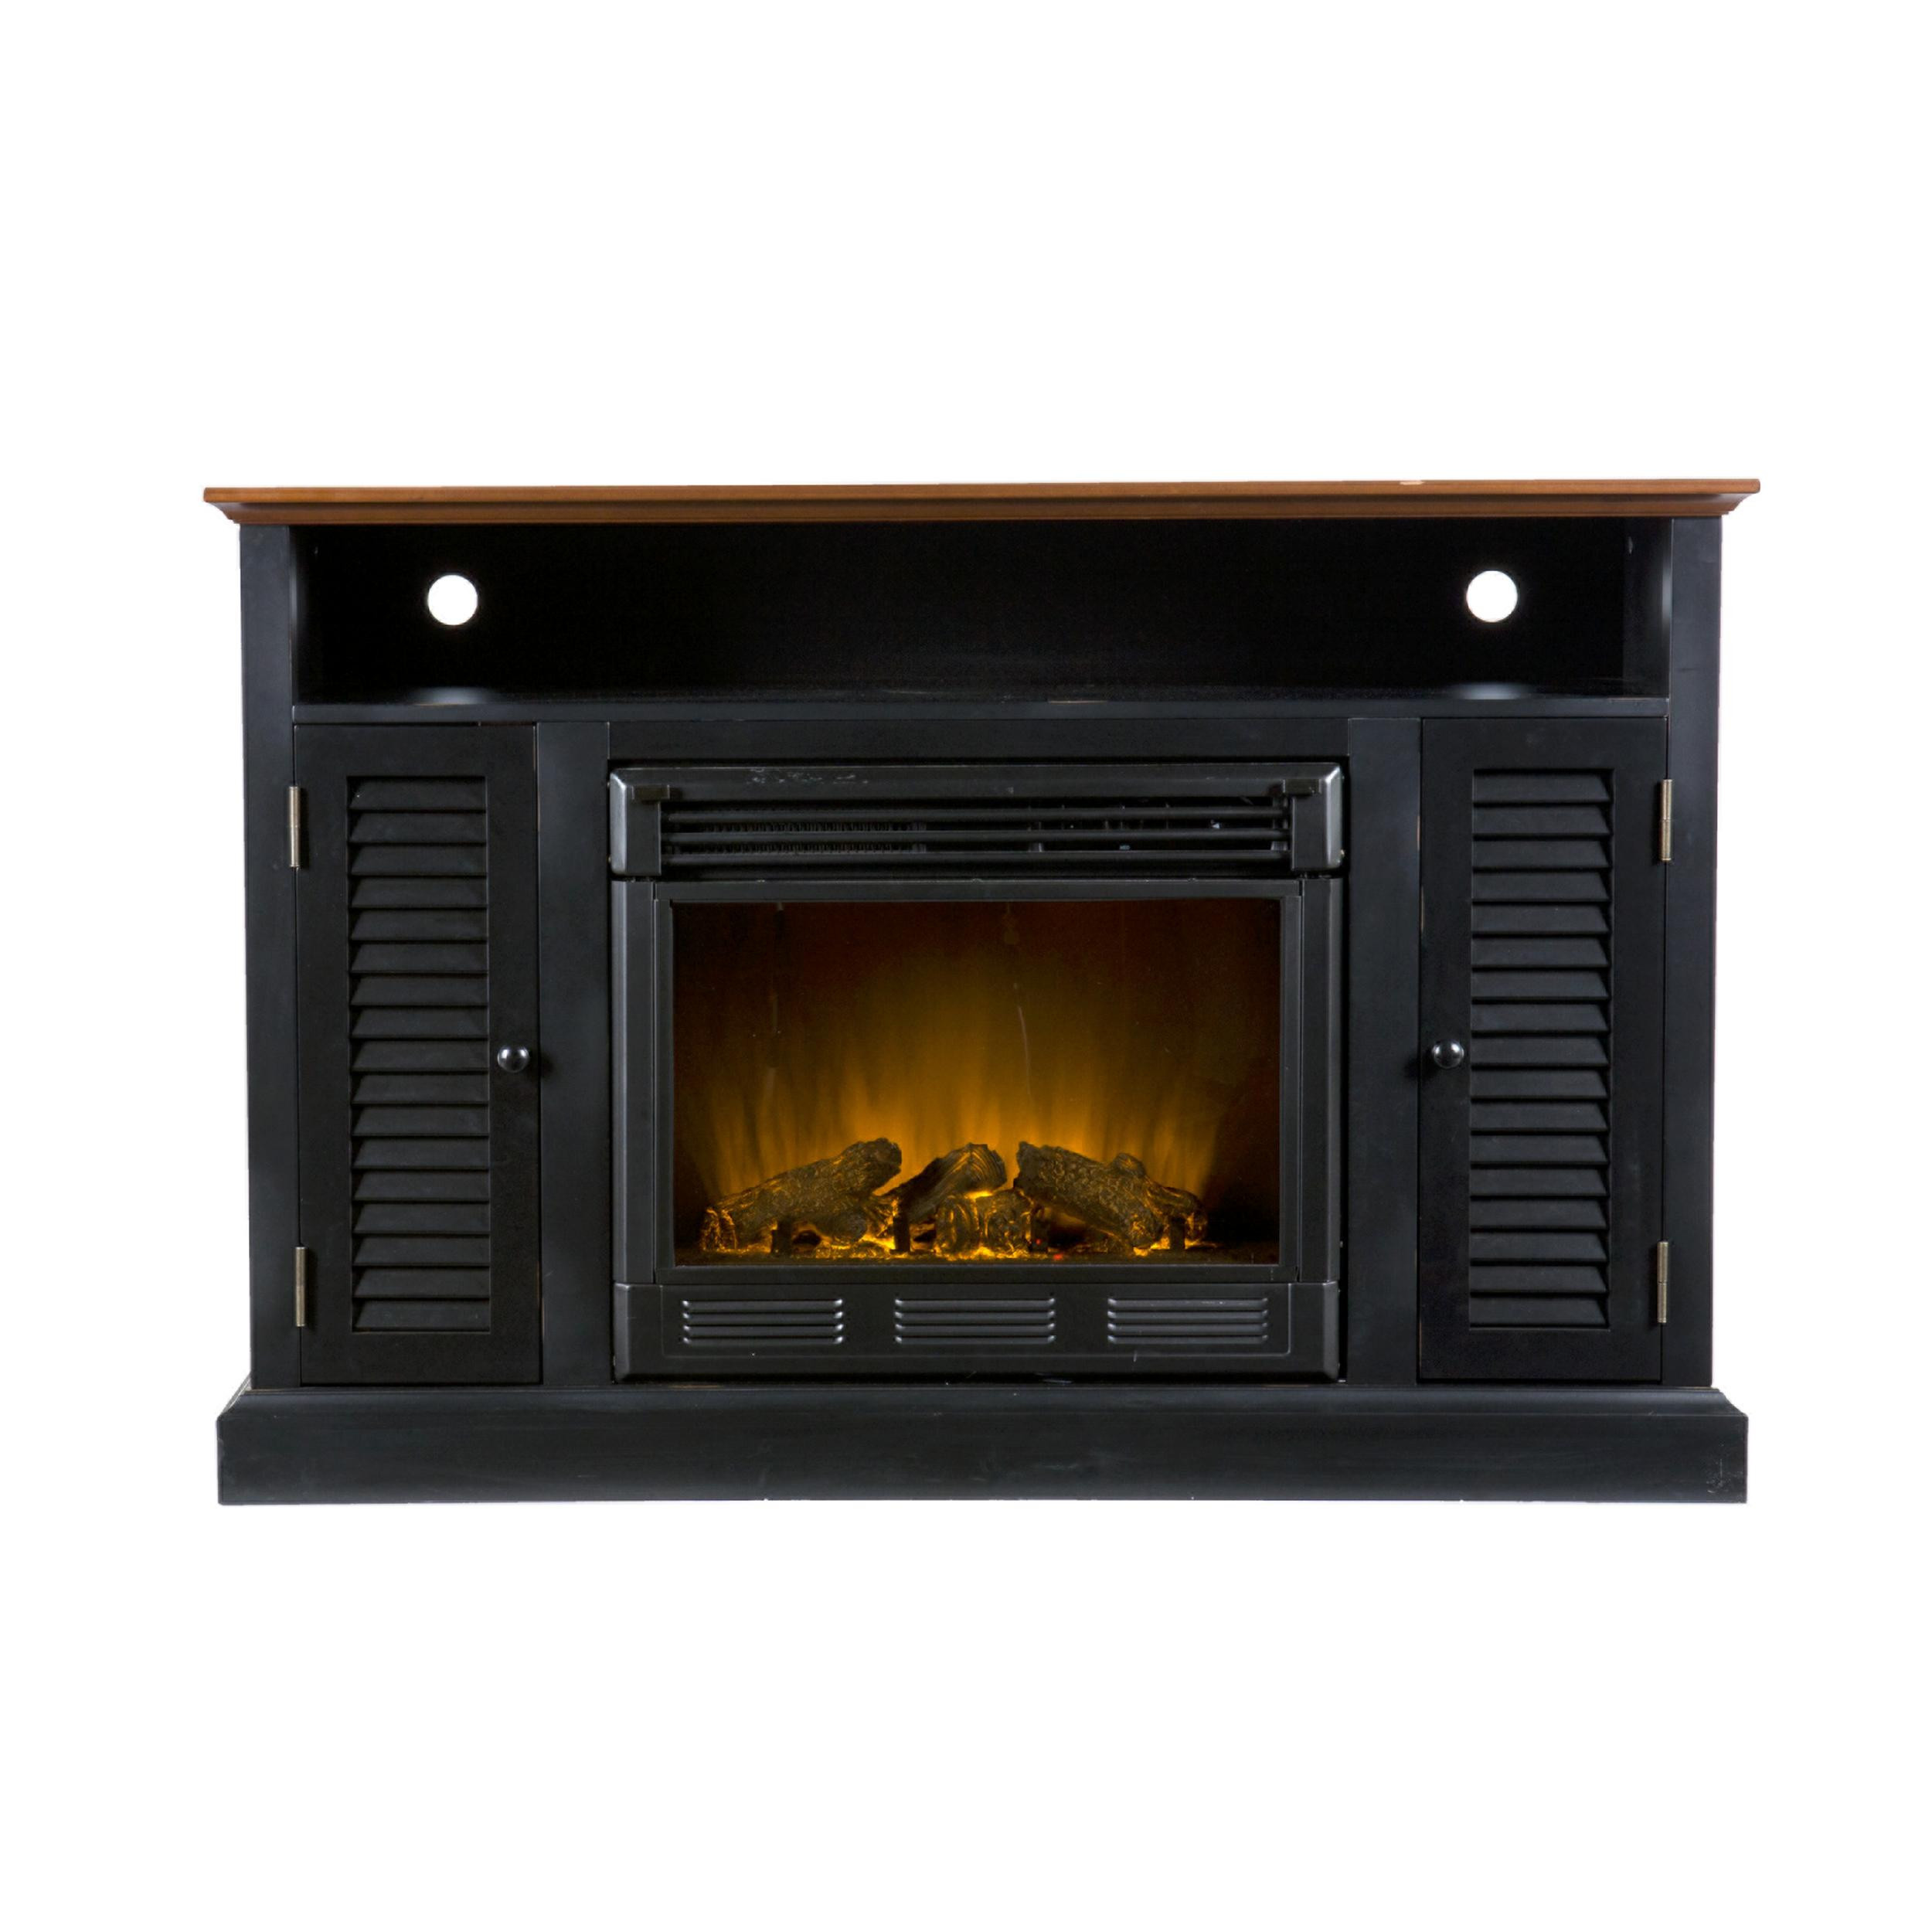 Electric Fireplace Console
 Amazon SEI Antebellum Media Console with Electric